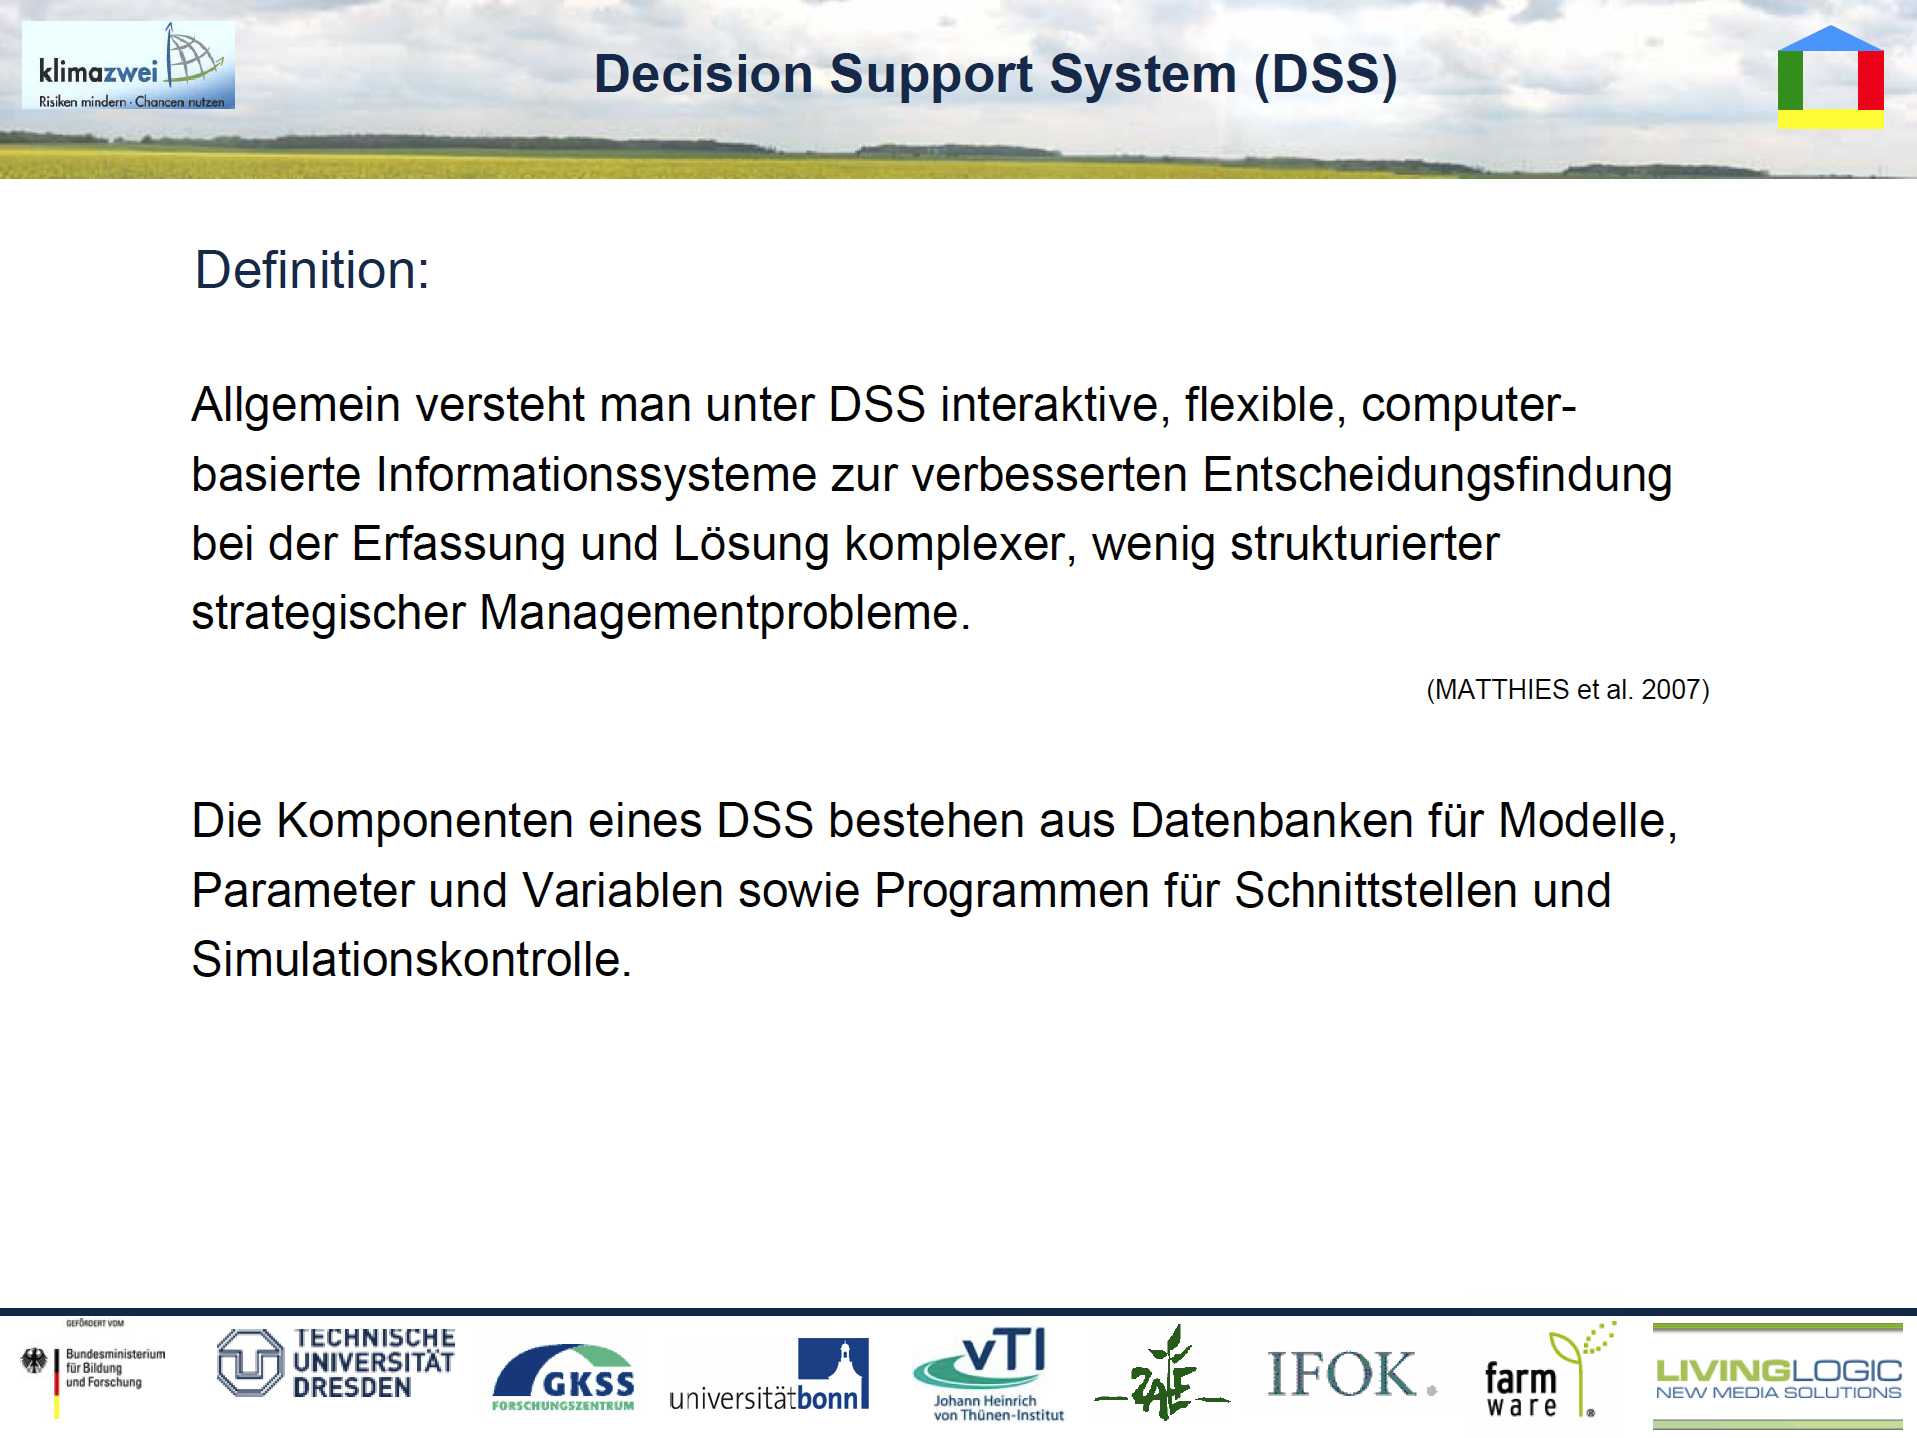 6/19 - Decision Support System (DSS)